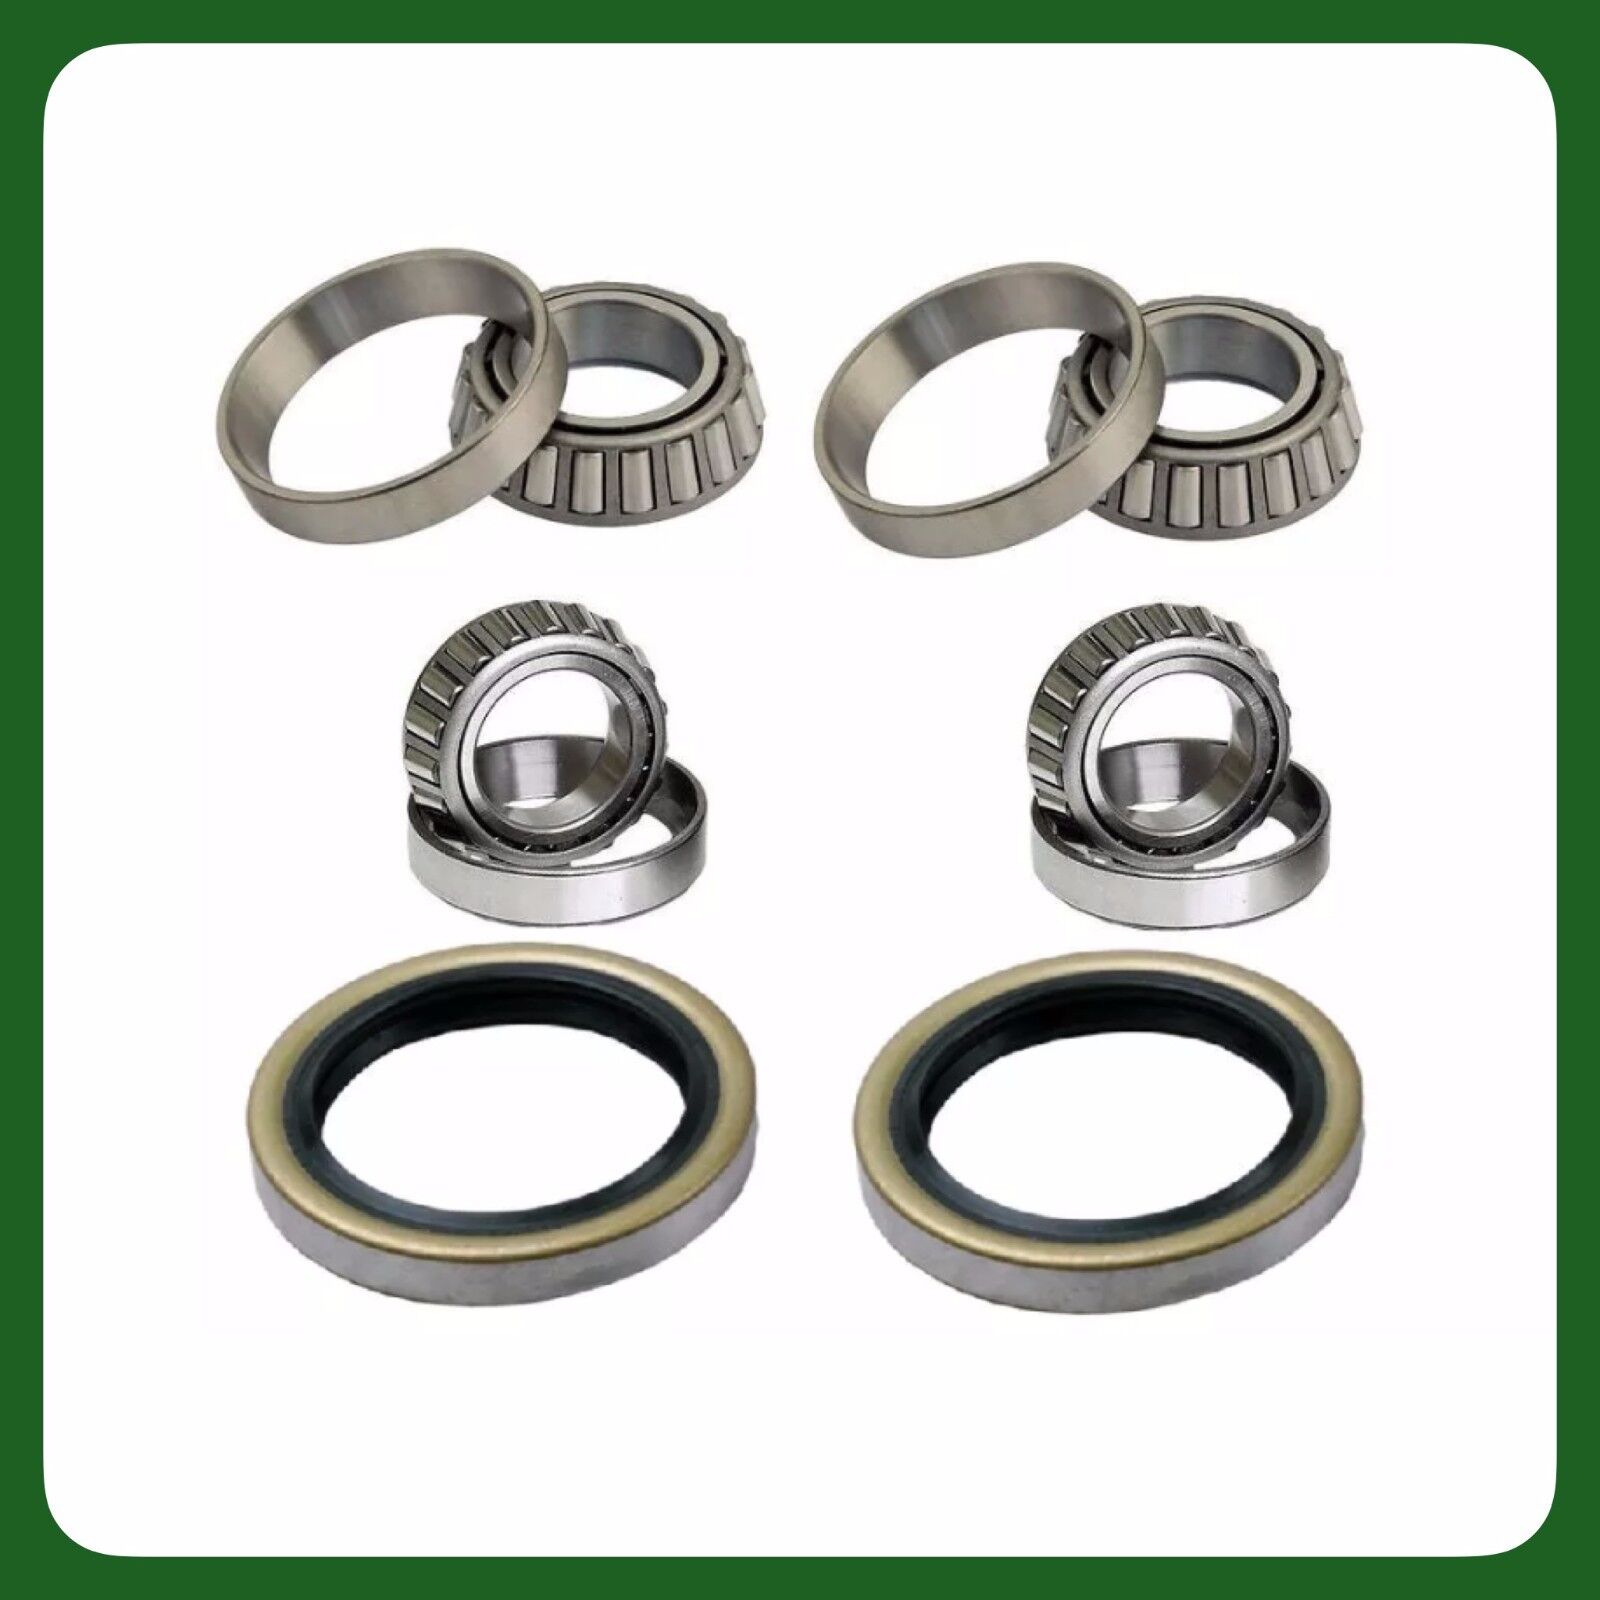 2 FRONT WHEEL BEARING & SEAL FOR ISUZU RODEO 1991-2001 KIT (2OUTER+2INNER+2SEAL)